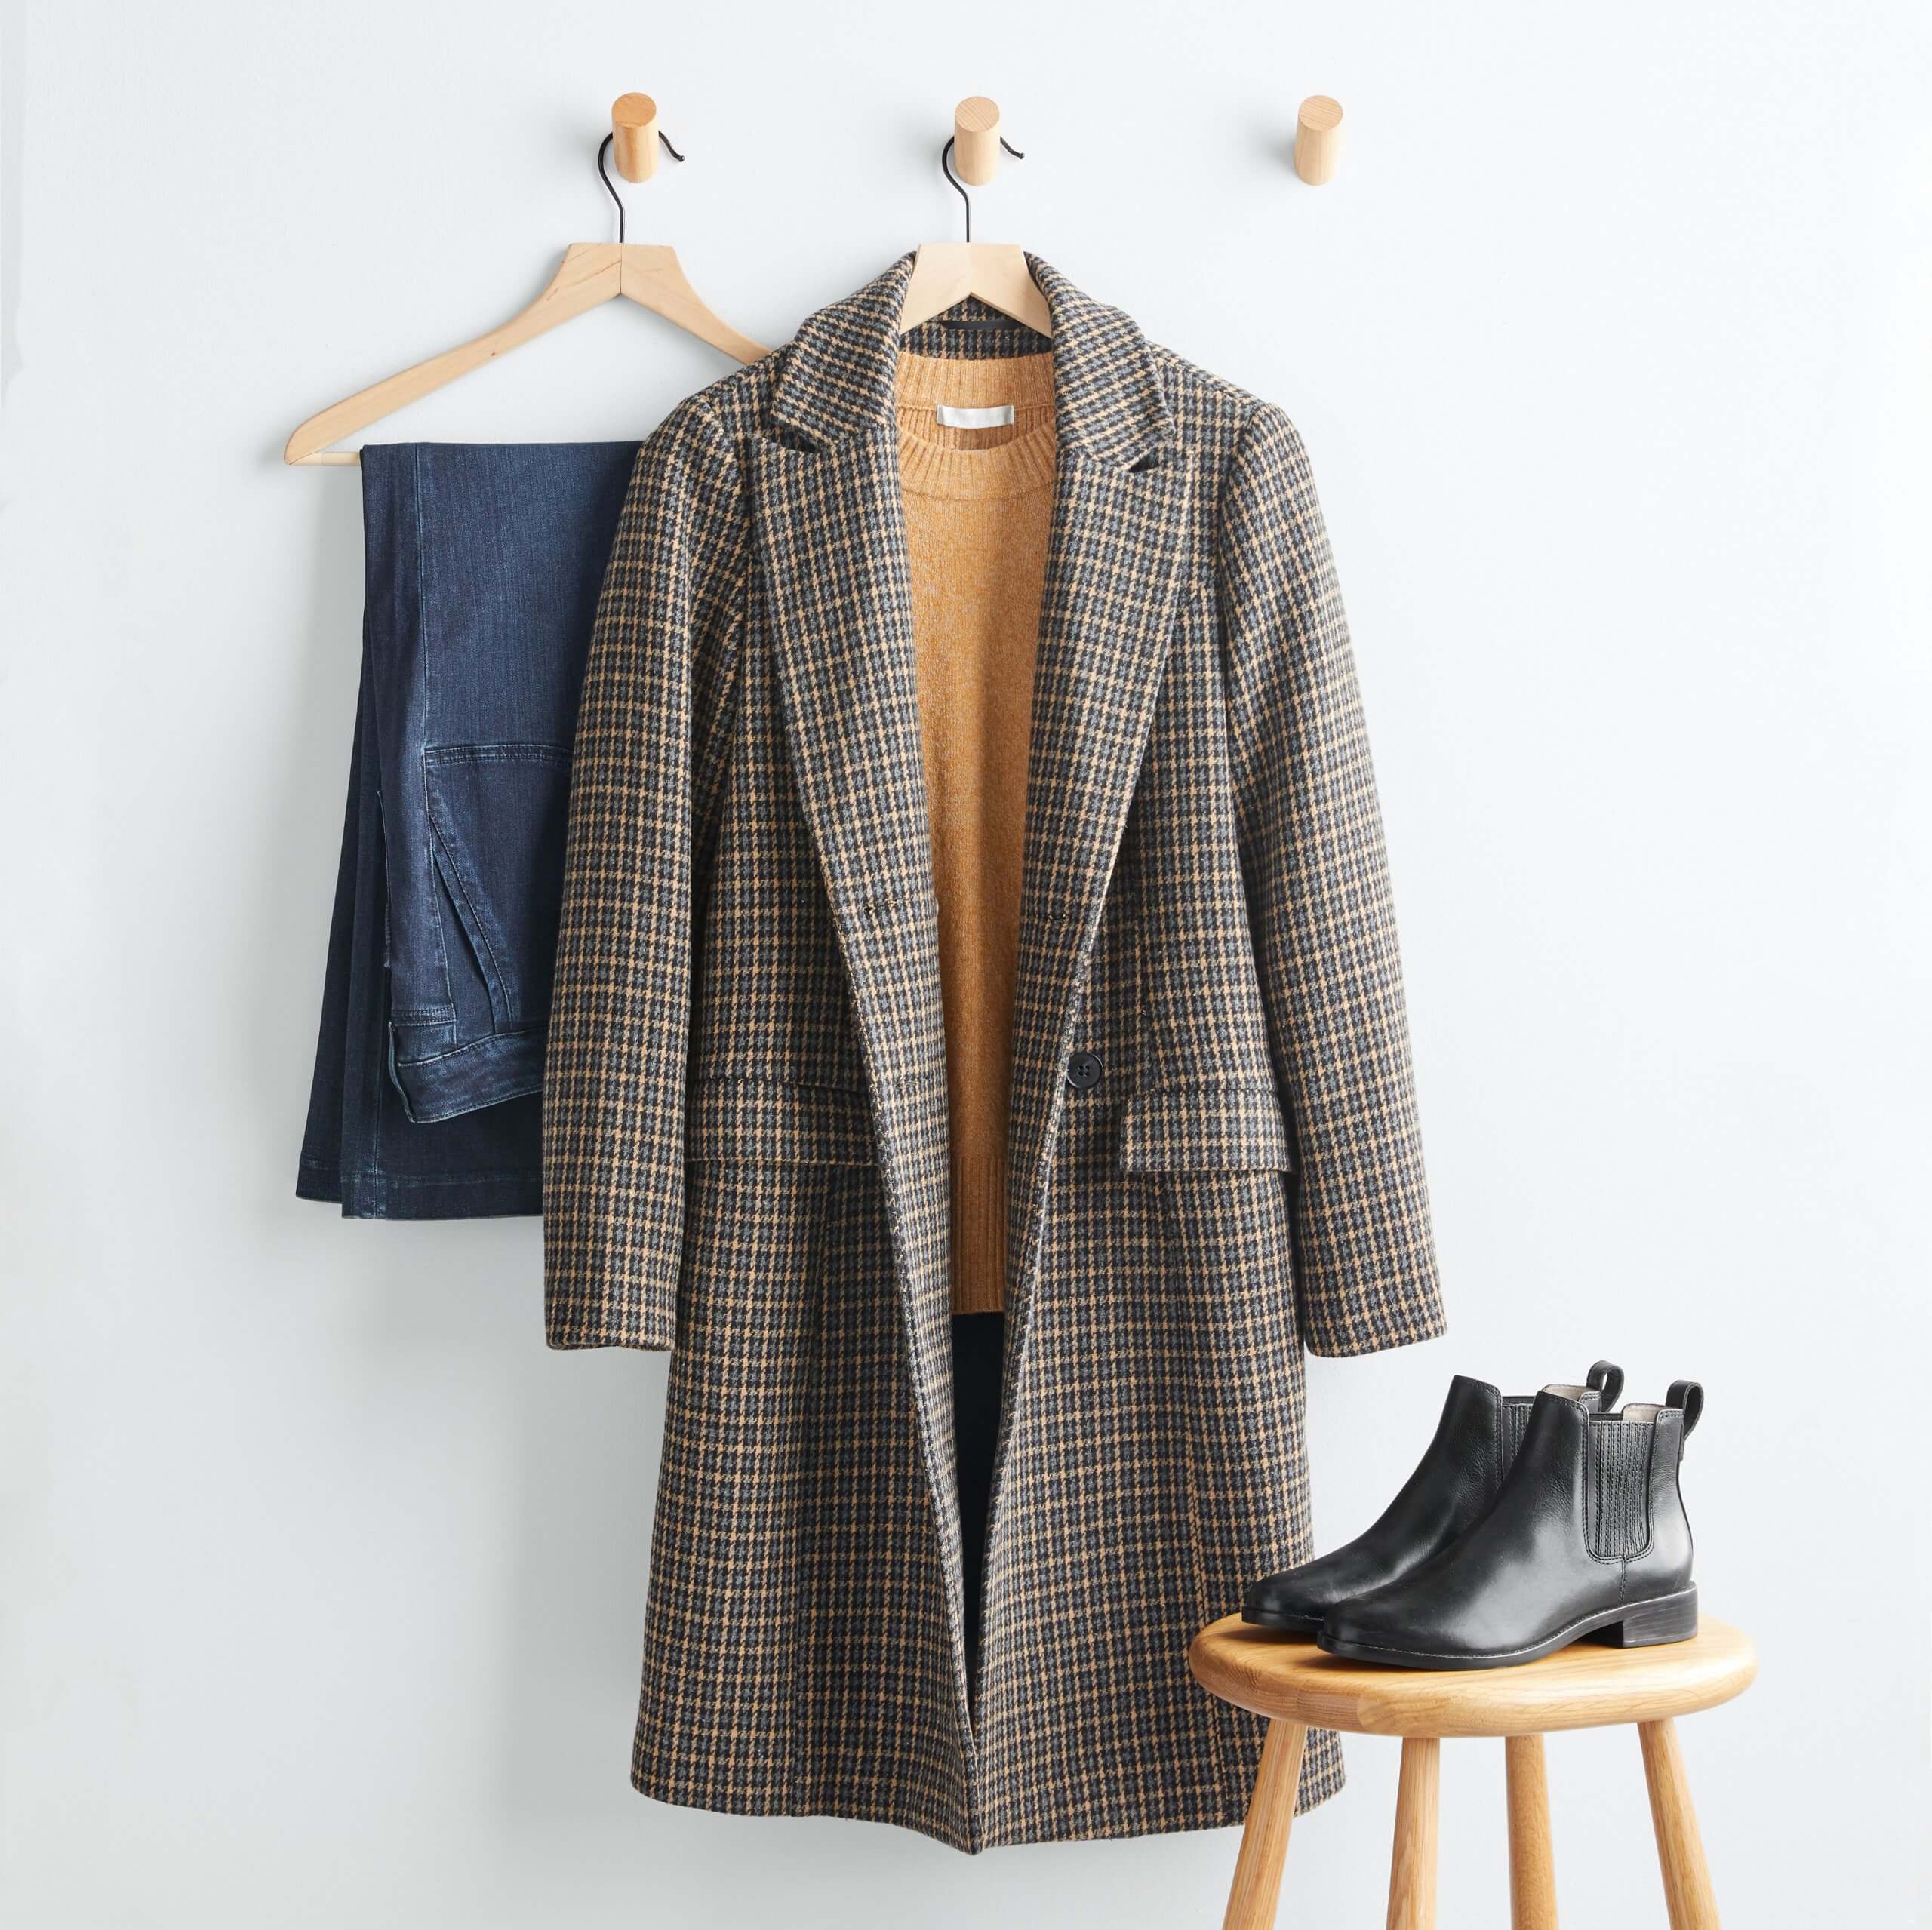 Stitch Fix Women’s outfit featuring brown plaid coat over mustard sweater hanging on wooden hanger, dark wash jeans on wooden hanger next to black leather booties on wooden stool. 